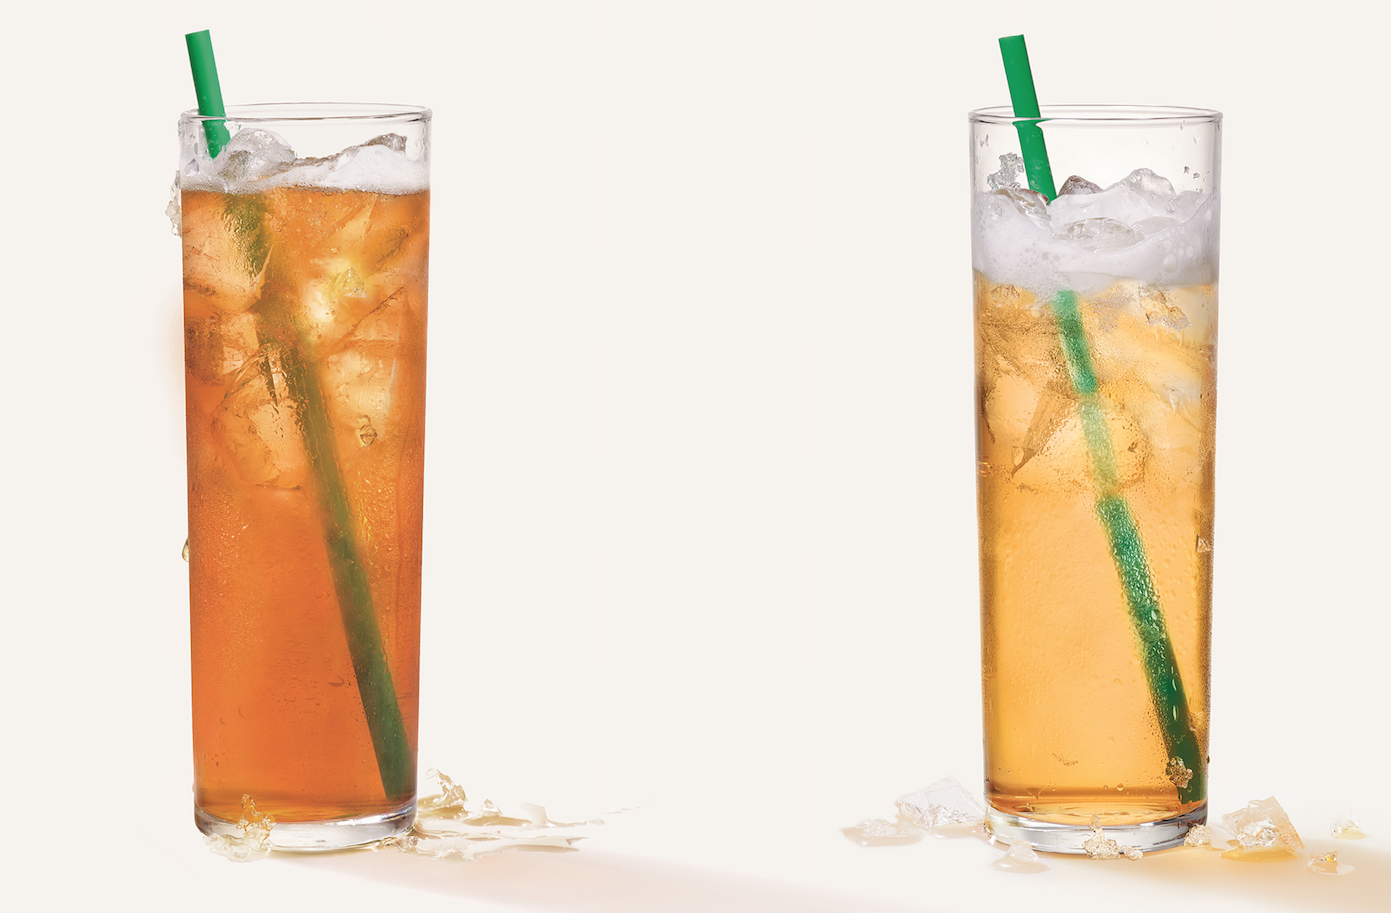 Starbucks Is Giving Out Free Iced Teas. Here's How to Get Them